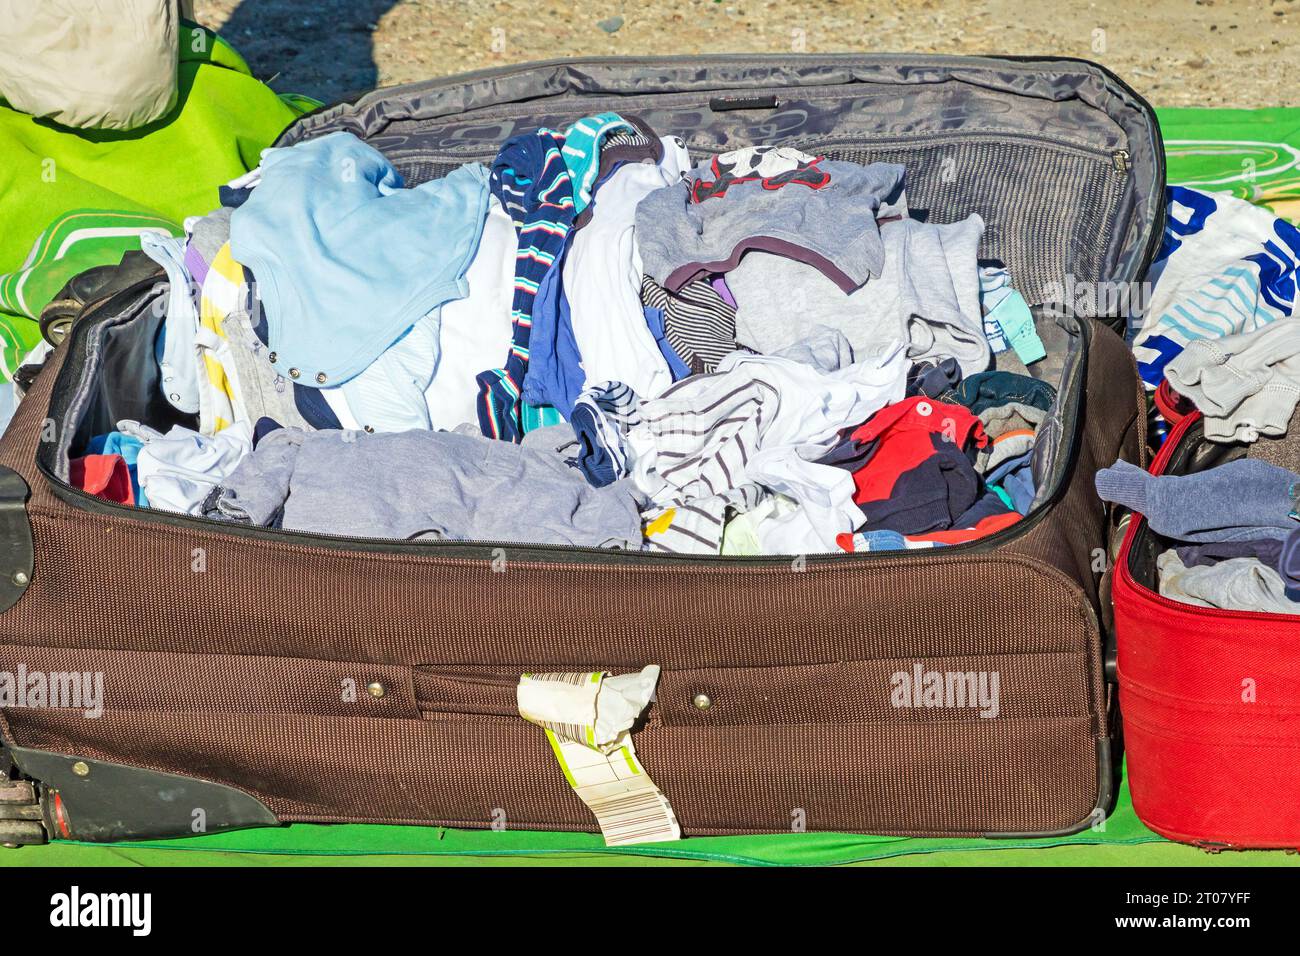 Suitcase opened after coming home from a holiday with clothes packed inside Stock Photo